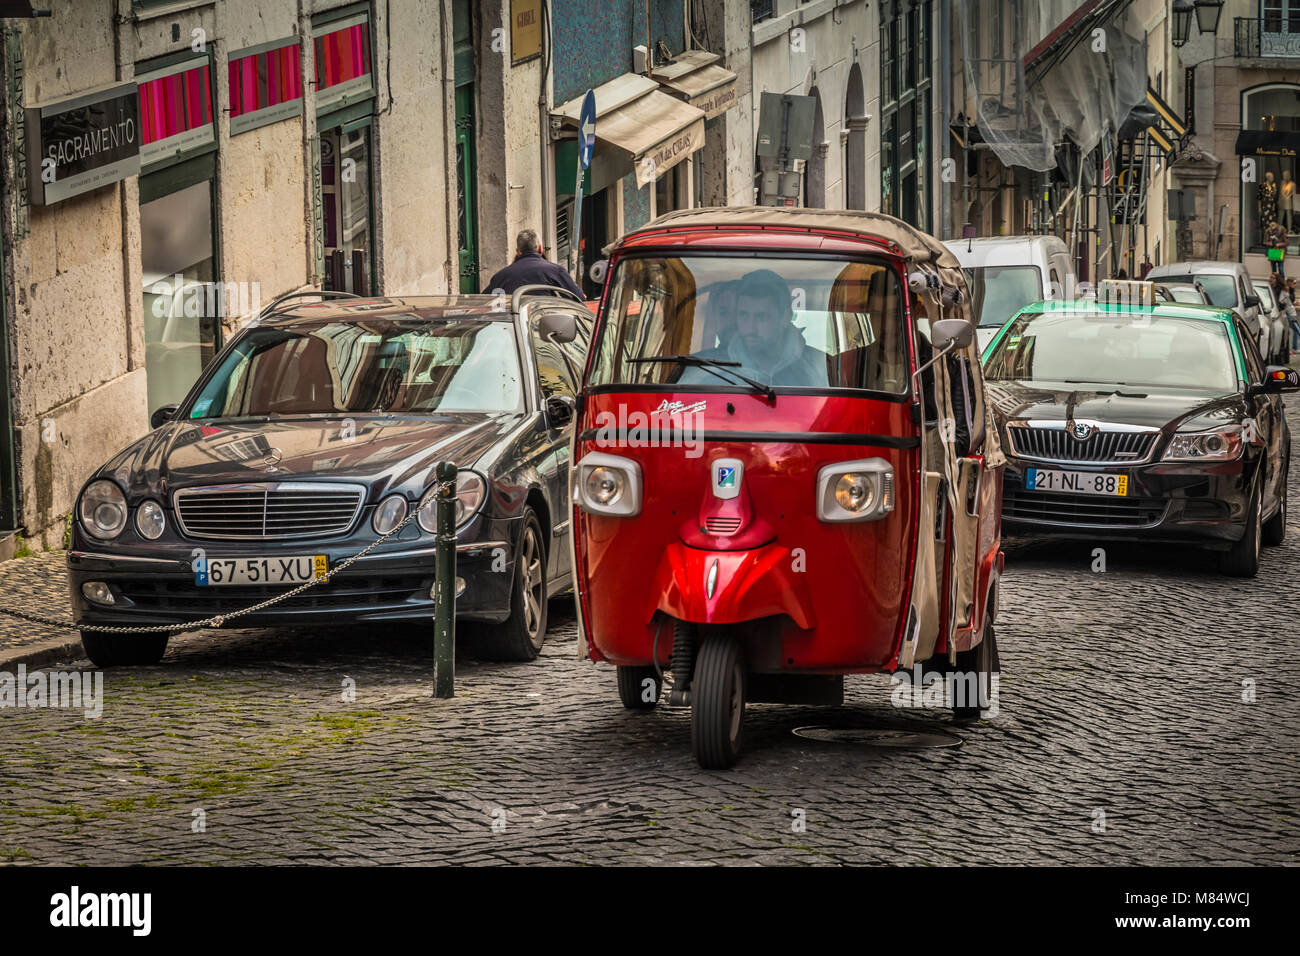 LISBON / PORTUGAL - FEBRUARY 17 2018: FUNNY SMALL RED CAR Stock Photo